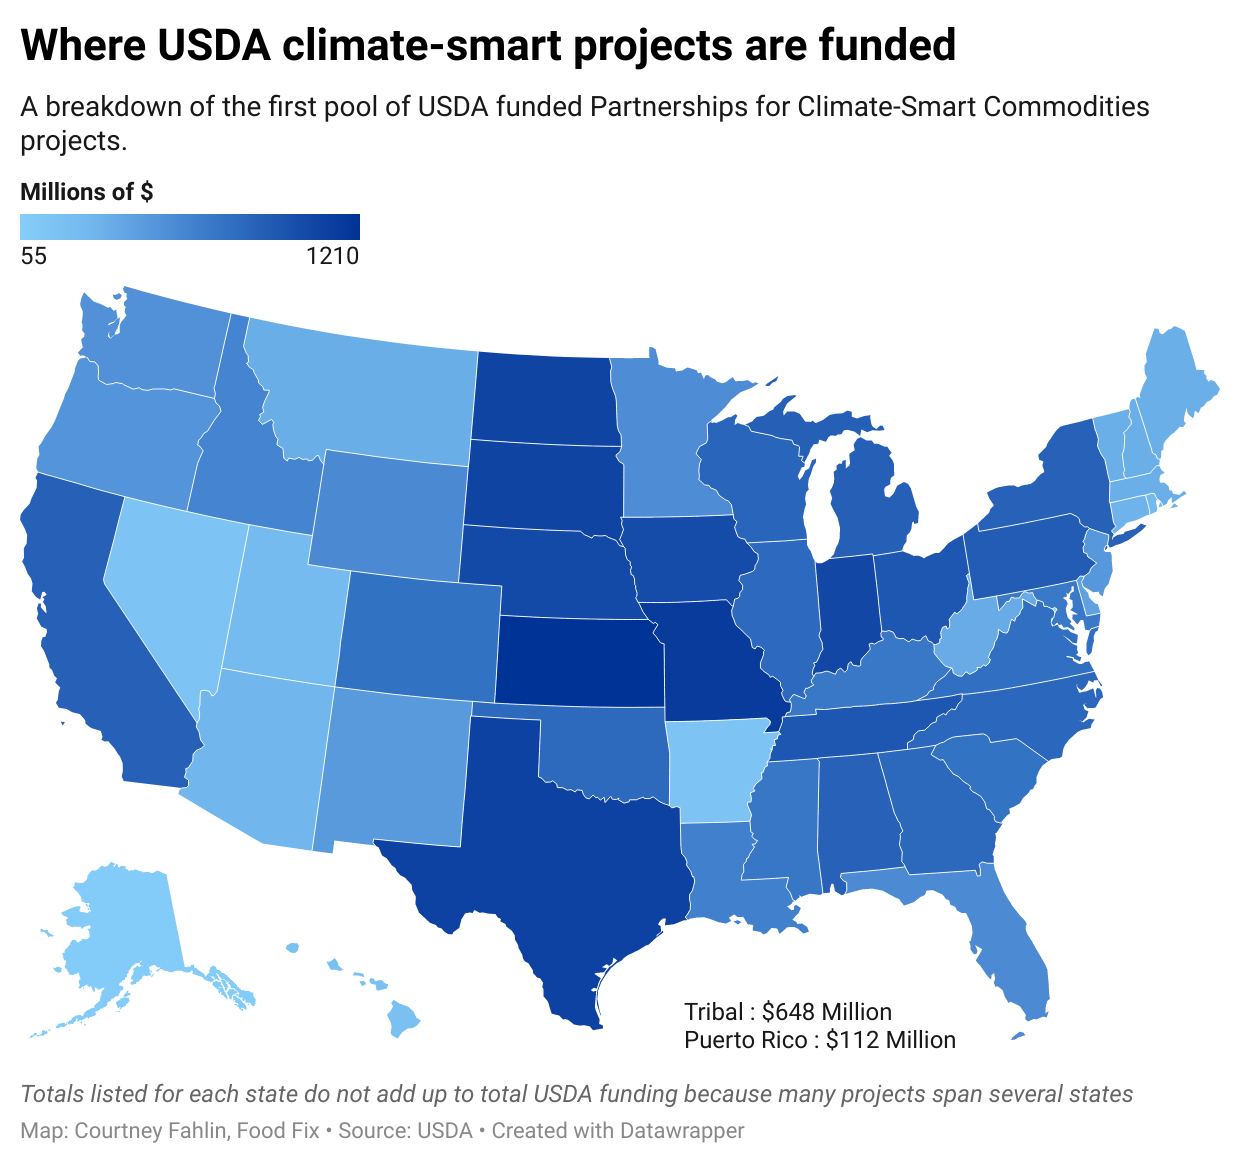 Heat map of where the first pool of USDA-funded climate-smart projects are located